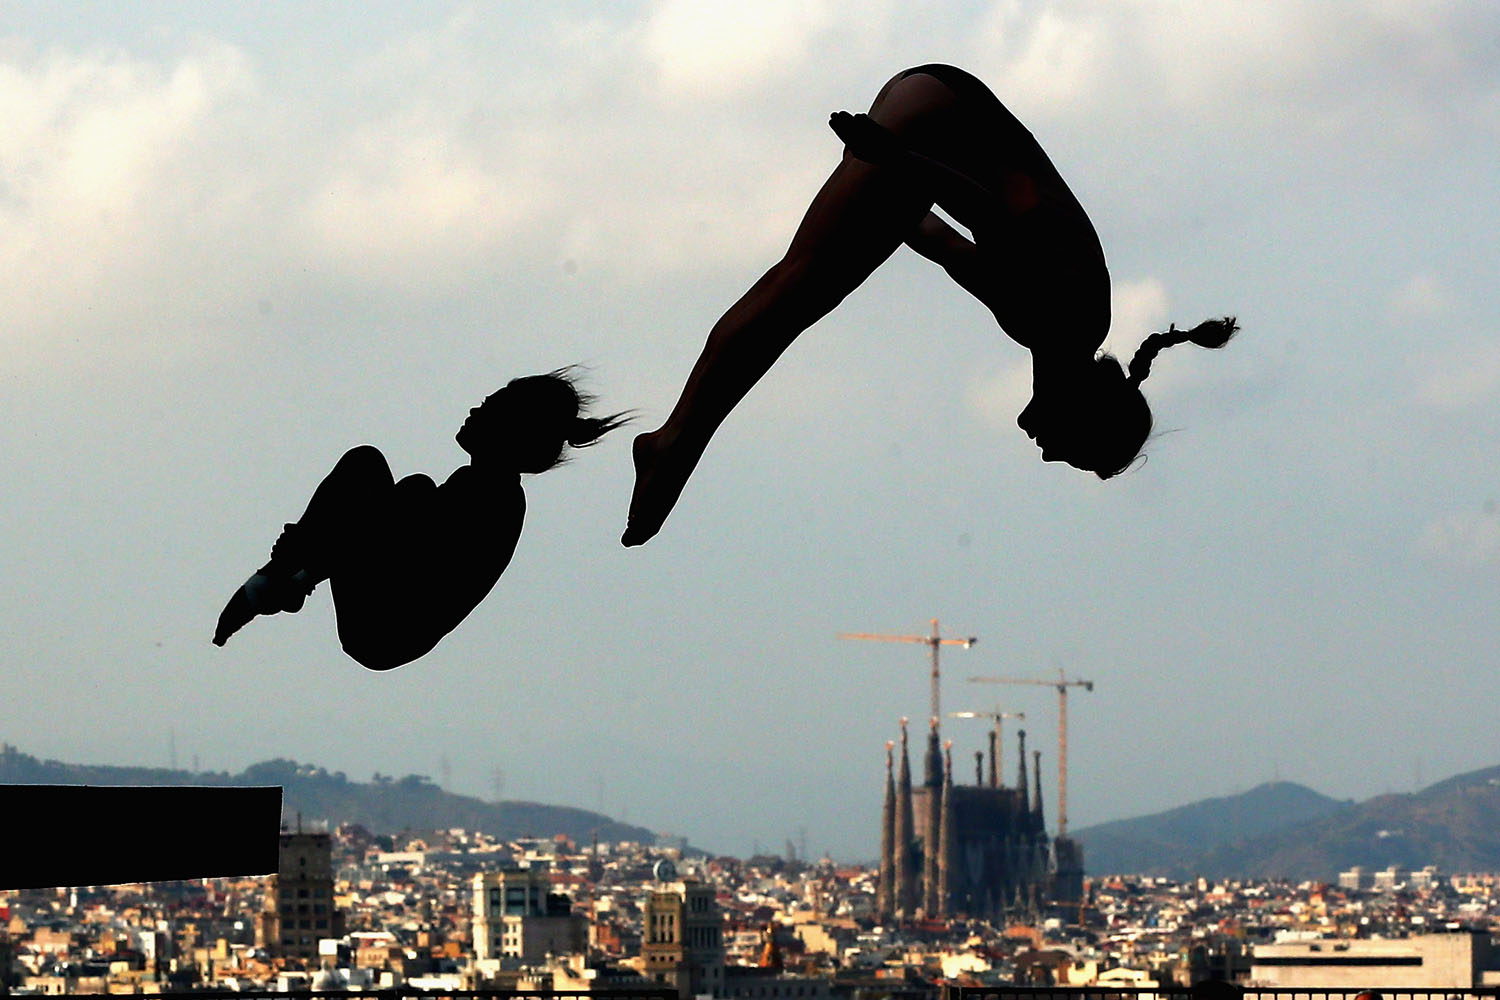 July 17, 2013. Diving competitors practice during a training session ahead of the FINA World Championships in Barcelona, Spain.